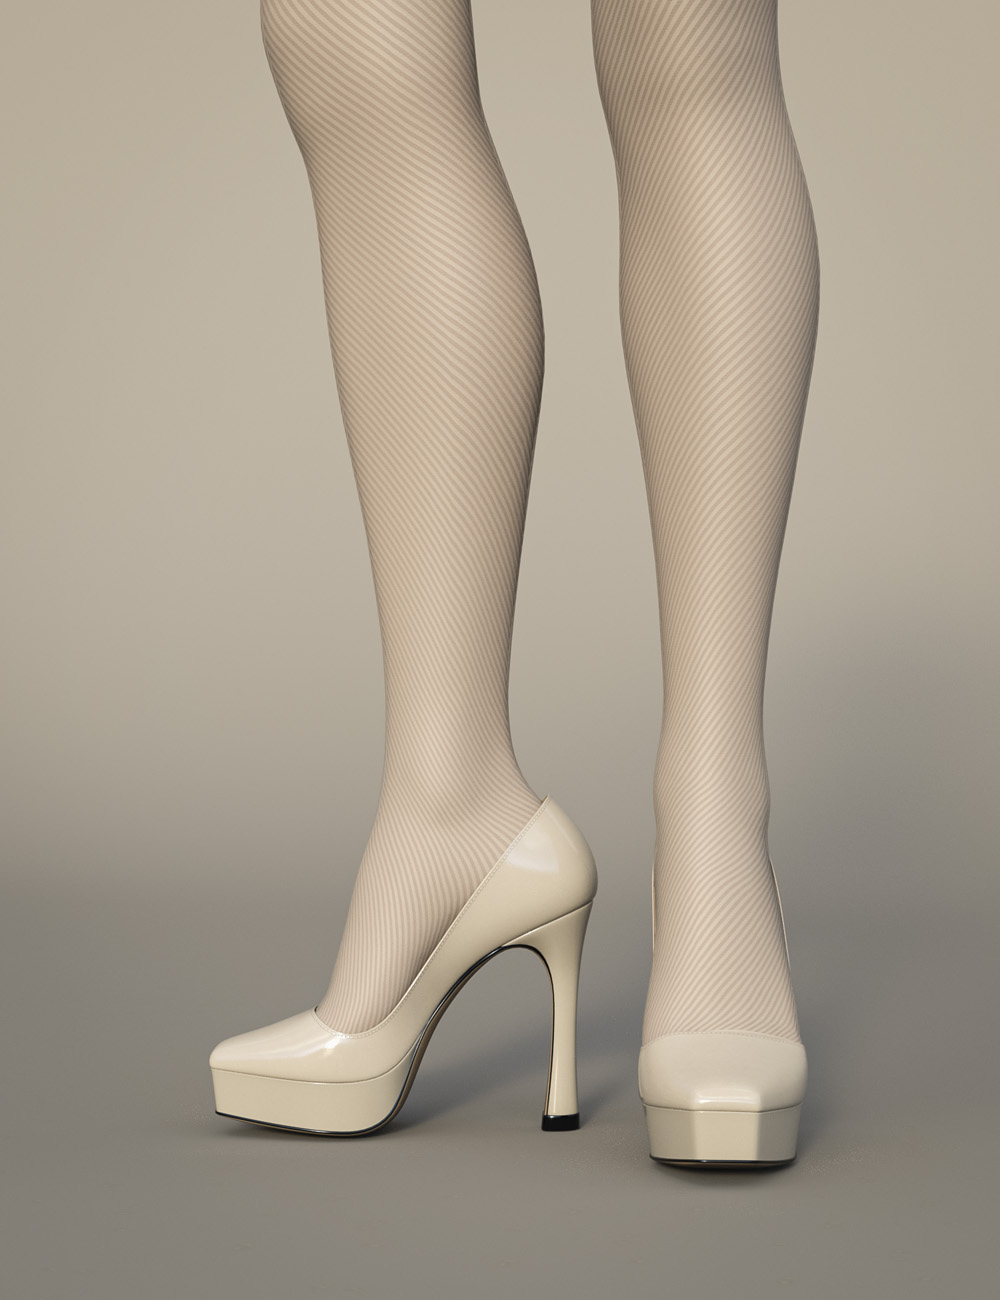 Square Pumps 2 for Genesis 8 and 8.1 Females by: dx30, 3D Models by Daz 3D